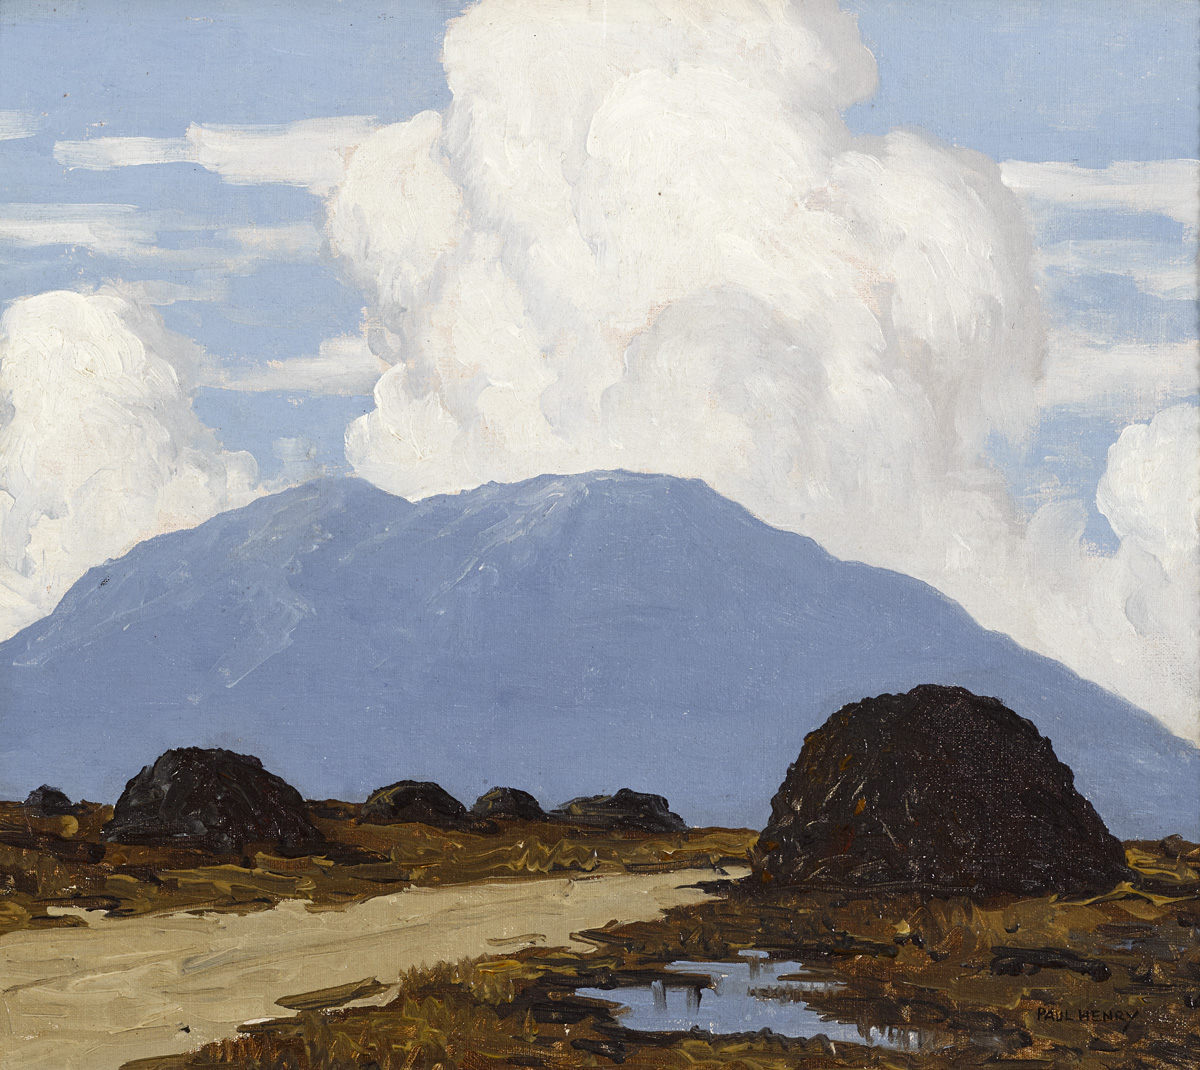 WEST OF IRELAND ROAD THROUGH THE BOG, c.1932-1935 by Paul Henry sold for 82,000 at Whyte's Auctions